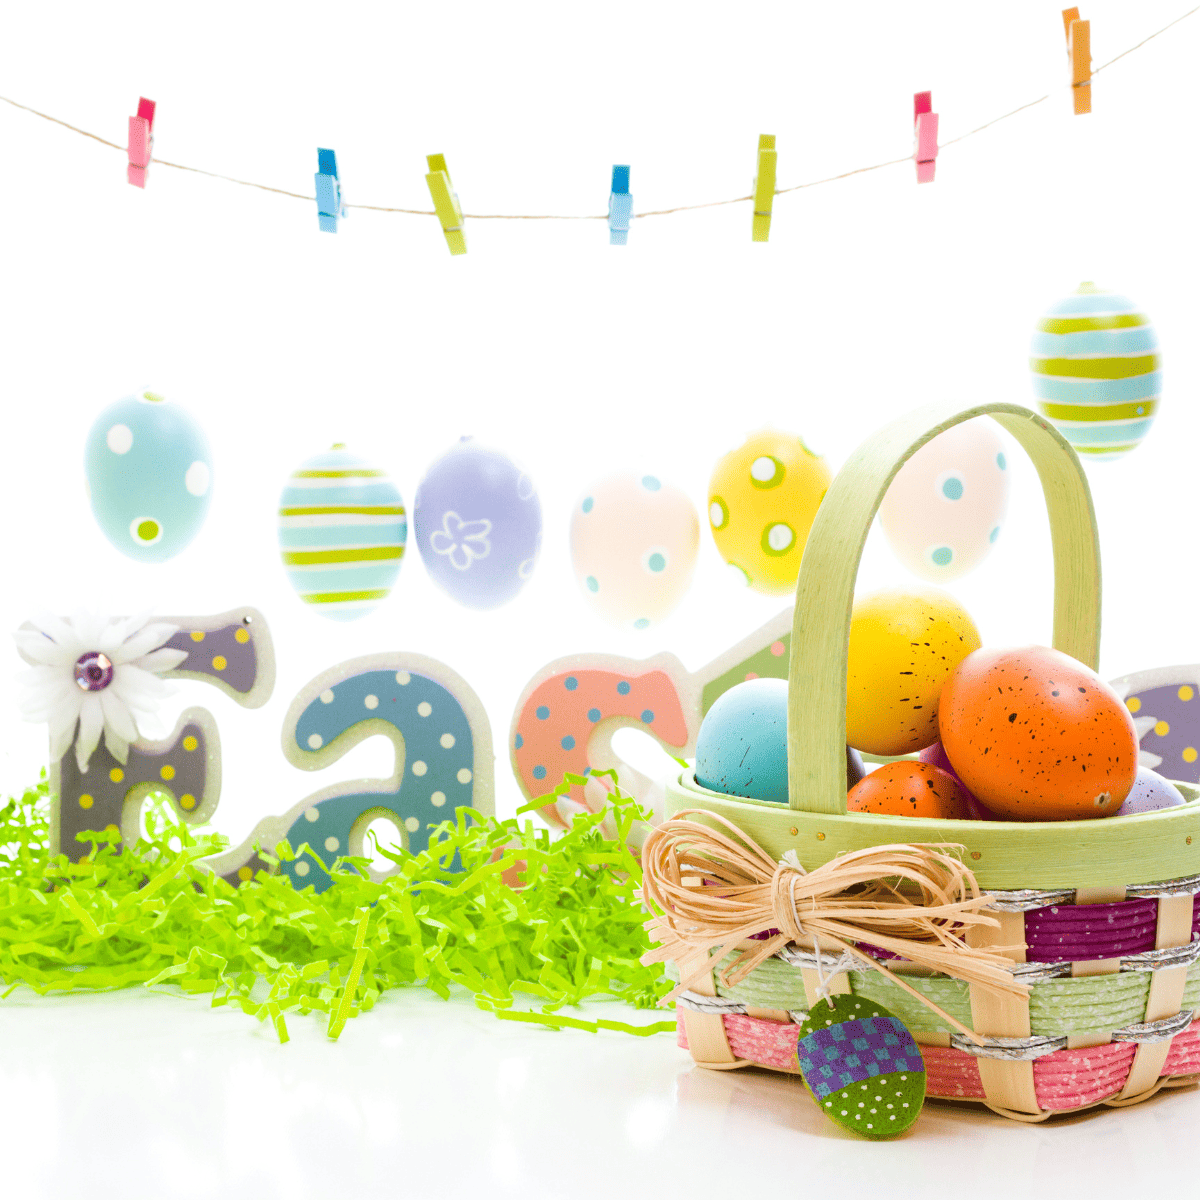 20 Ideas for Baby’s Easter Basket